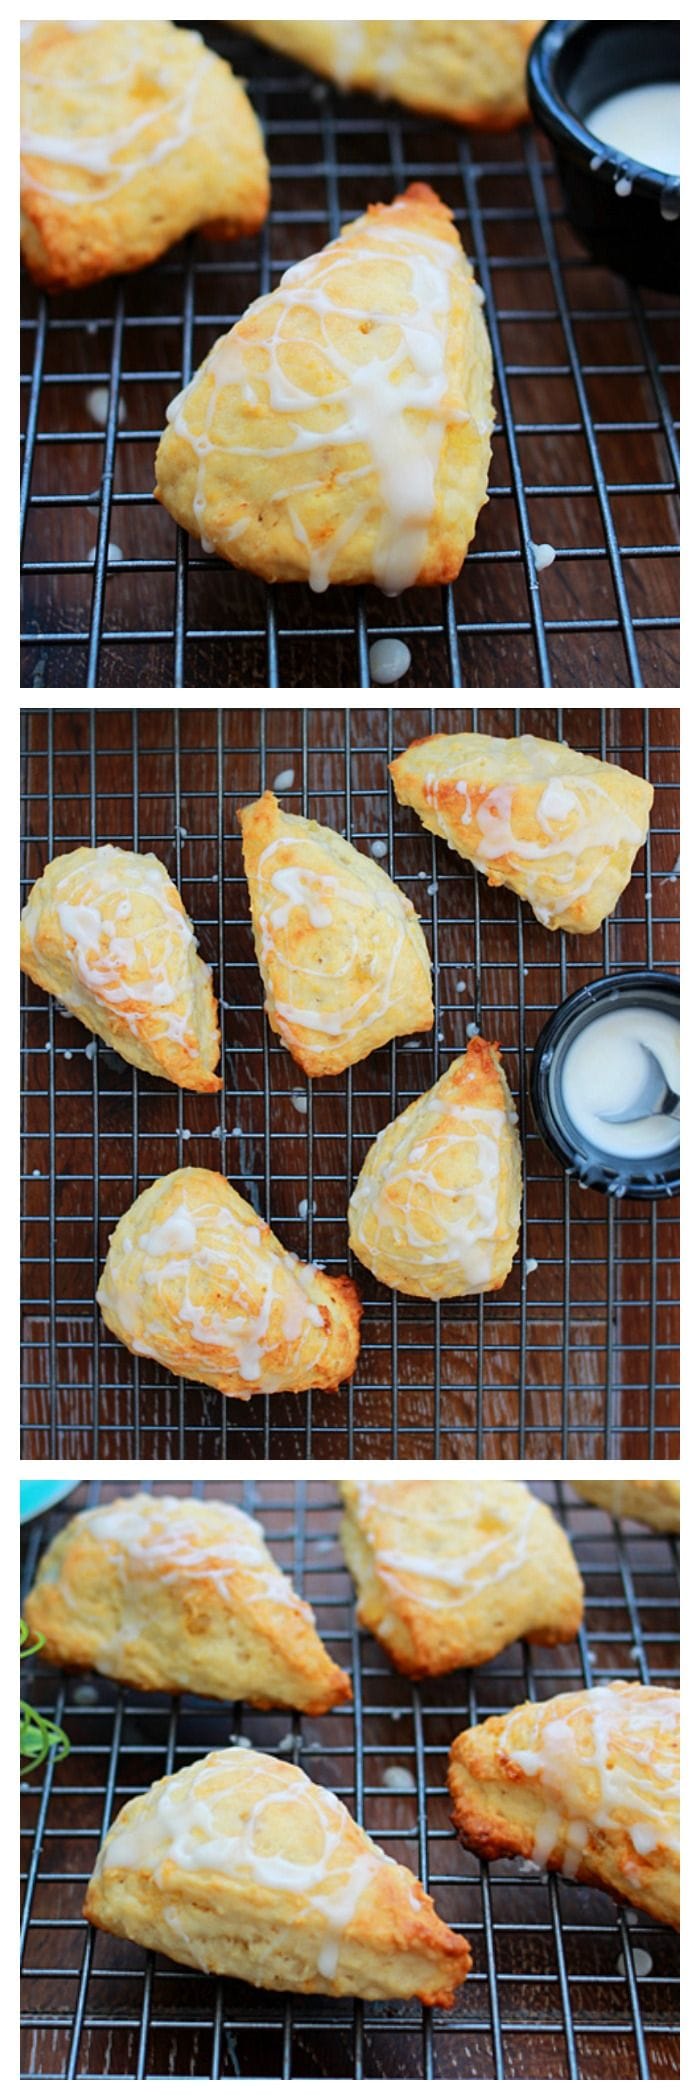 Glazed Lemon-Ginger Scones. Sweet, citrusy, with a hint of heat from the ginger. Super easy recipe that the whole family will enjoy | rasamalaysia.com